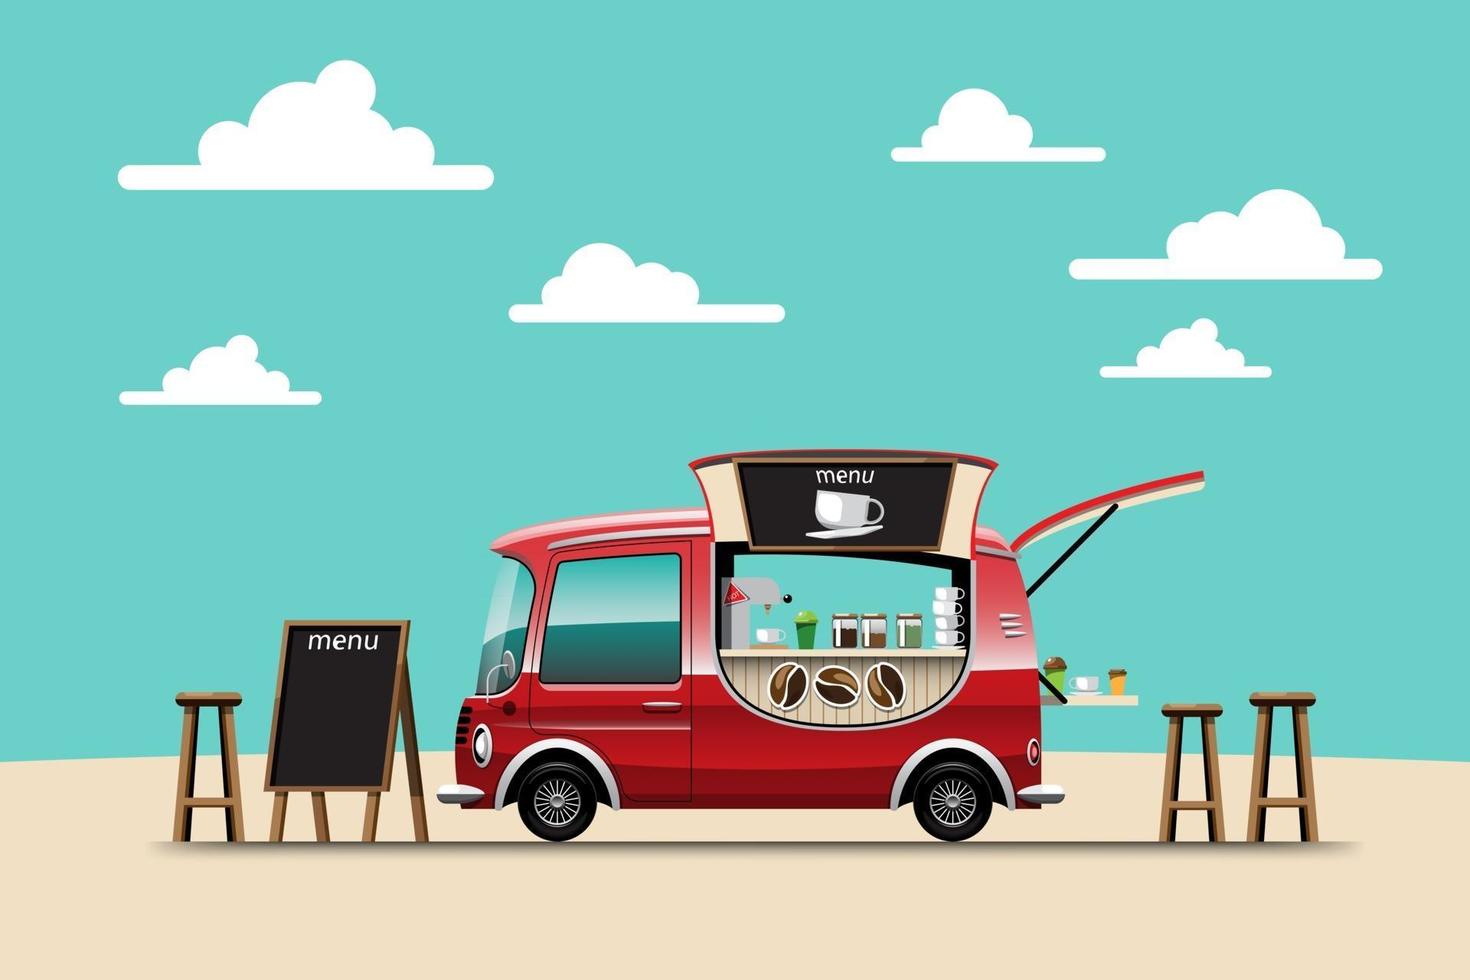 The food truck side view menu coffee wooden chair vector